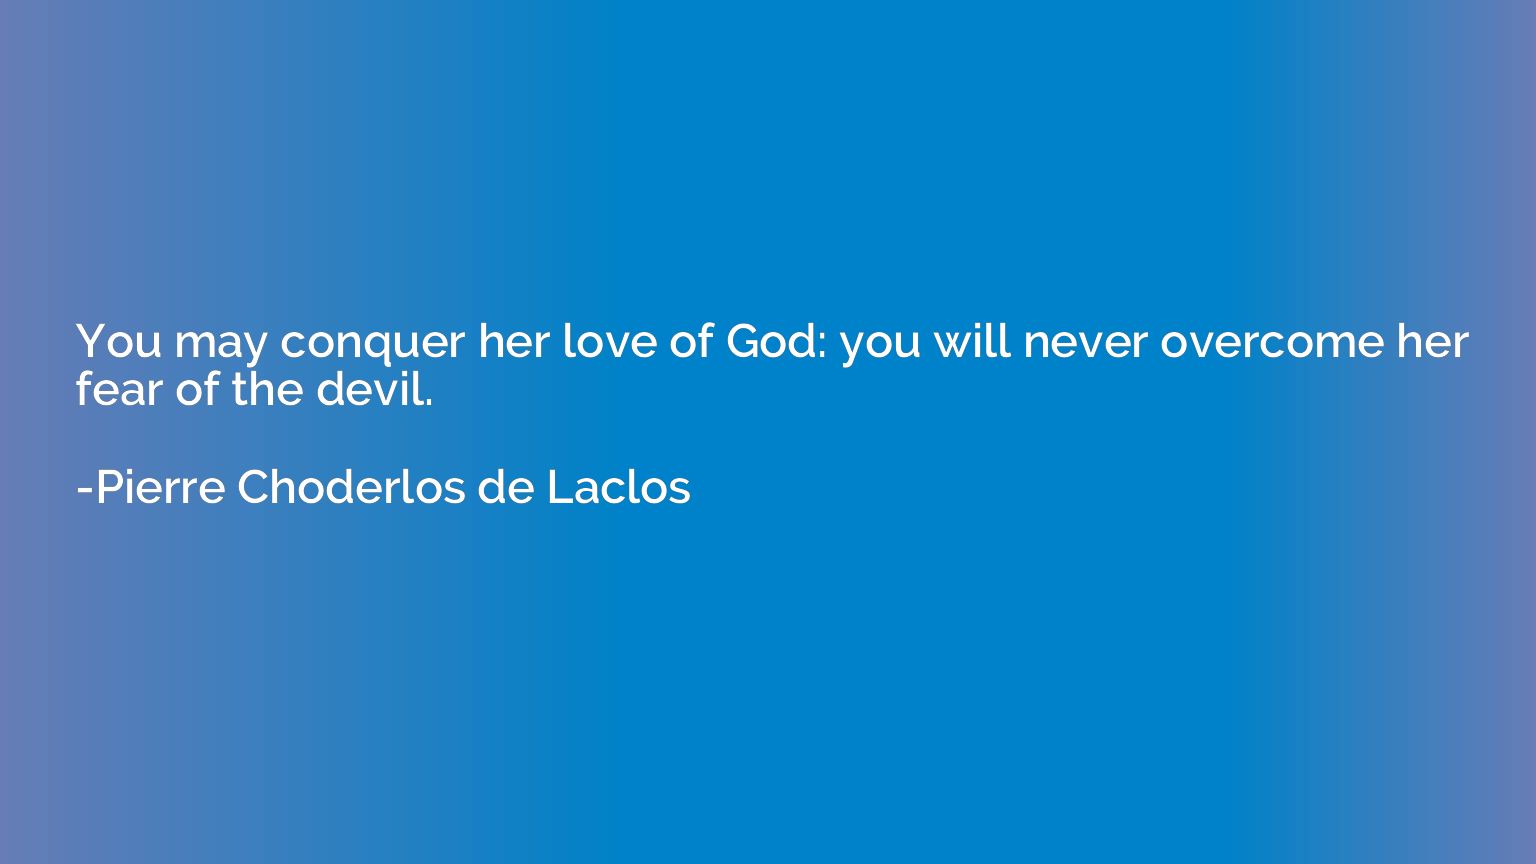 You may conquer her love of God: you will never overcome her